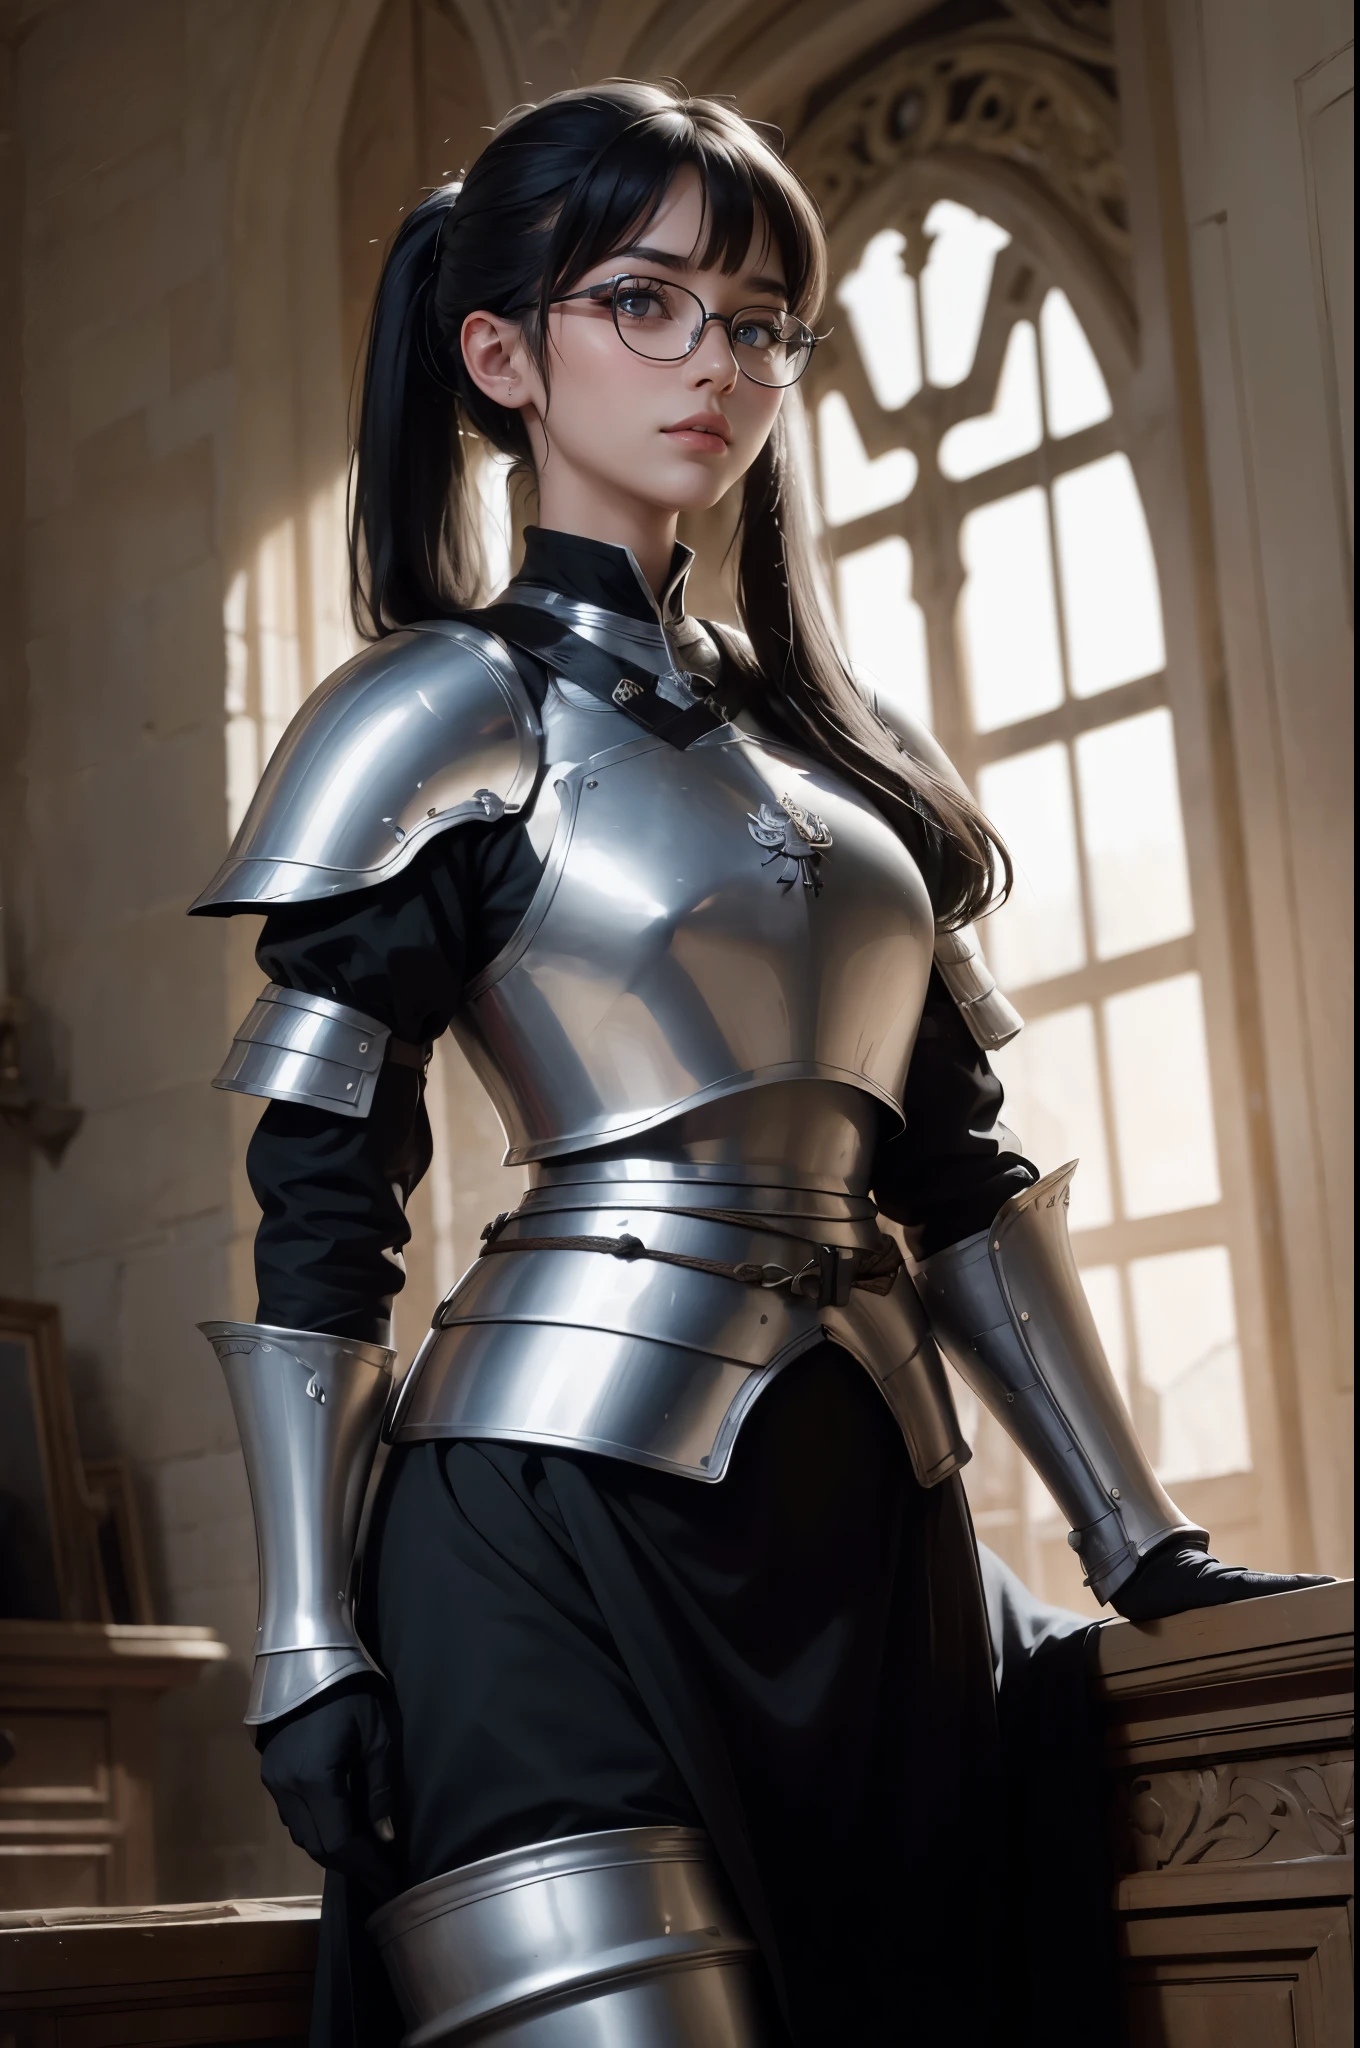 ((wide angle shot of the Hundred Years' War in France)), a beautiful woman, black hair in a ponytail, bangs, wearing glasses, wearing Jeanne d'Arc armor